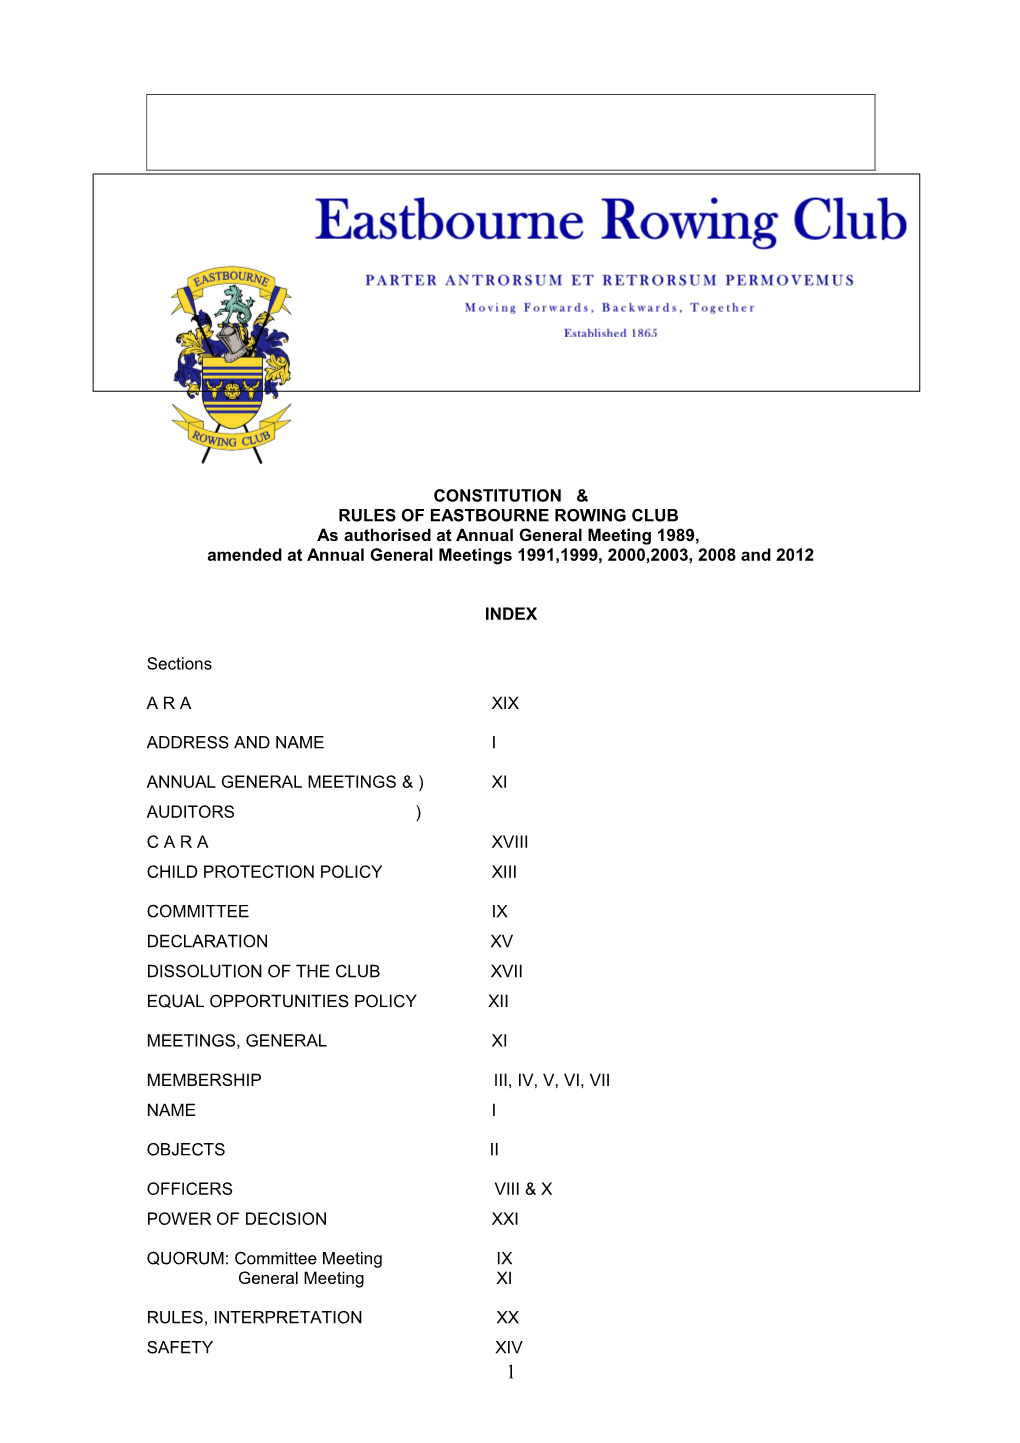 CONSTITUTION & RULES of EASTBOURNE ROWING CLUB As Authorised at Annual General Meeting